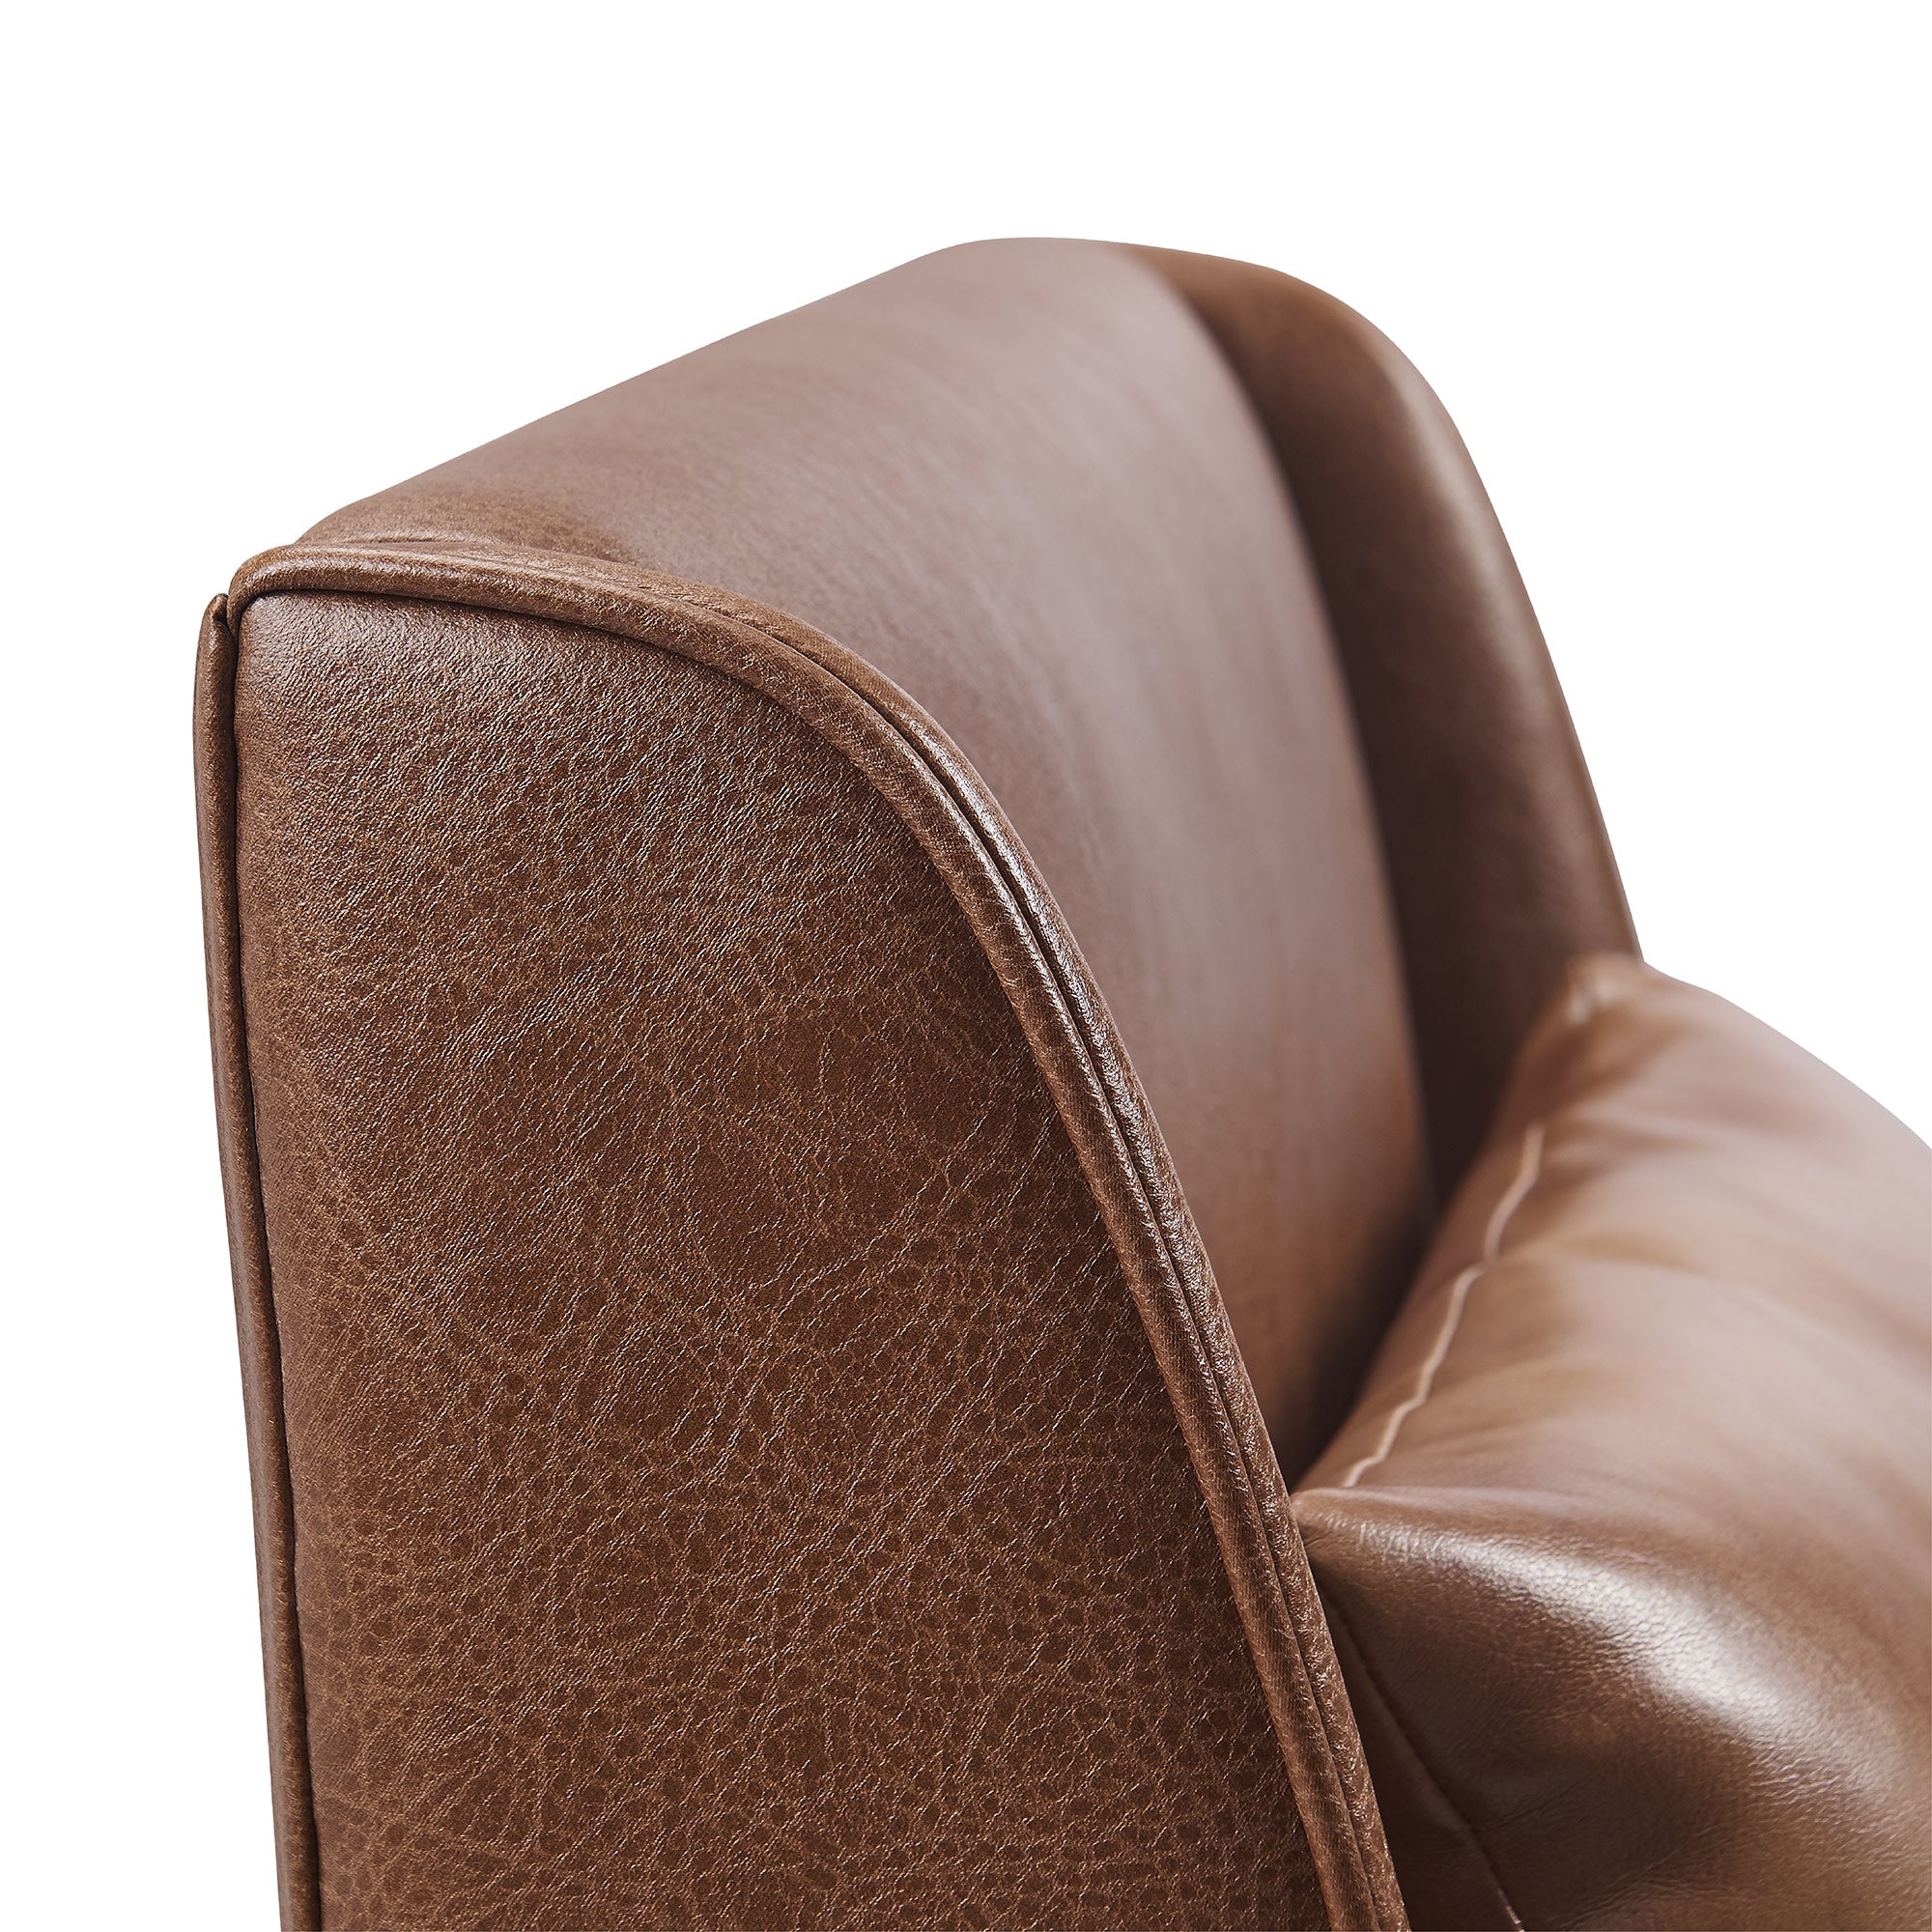 Teamson Home Marc Faux Leather Lounge Chair with Pillow and Solid Wood Legs, Brown